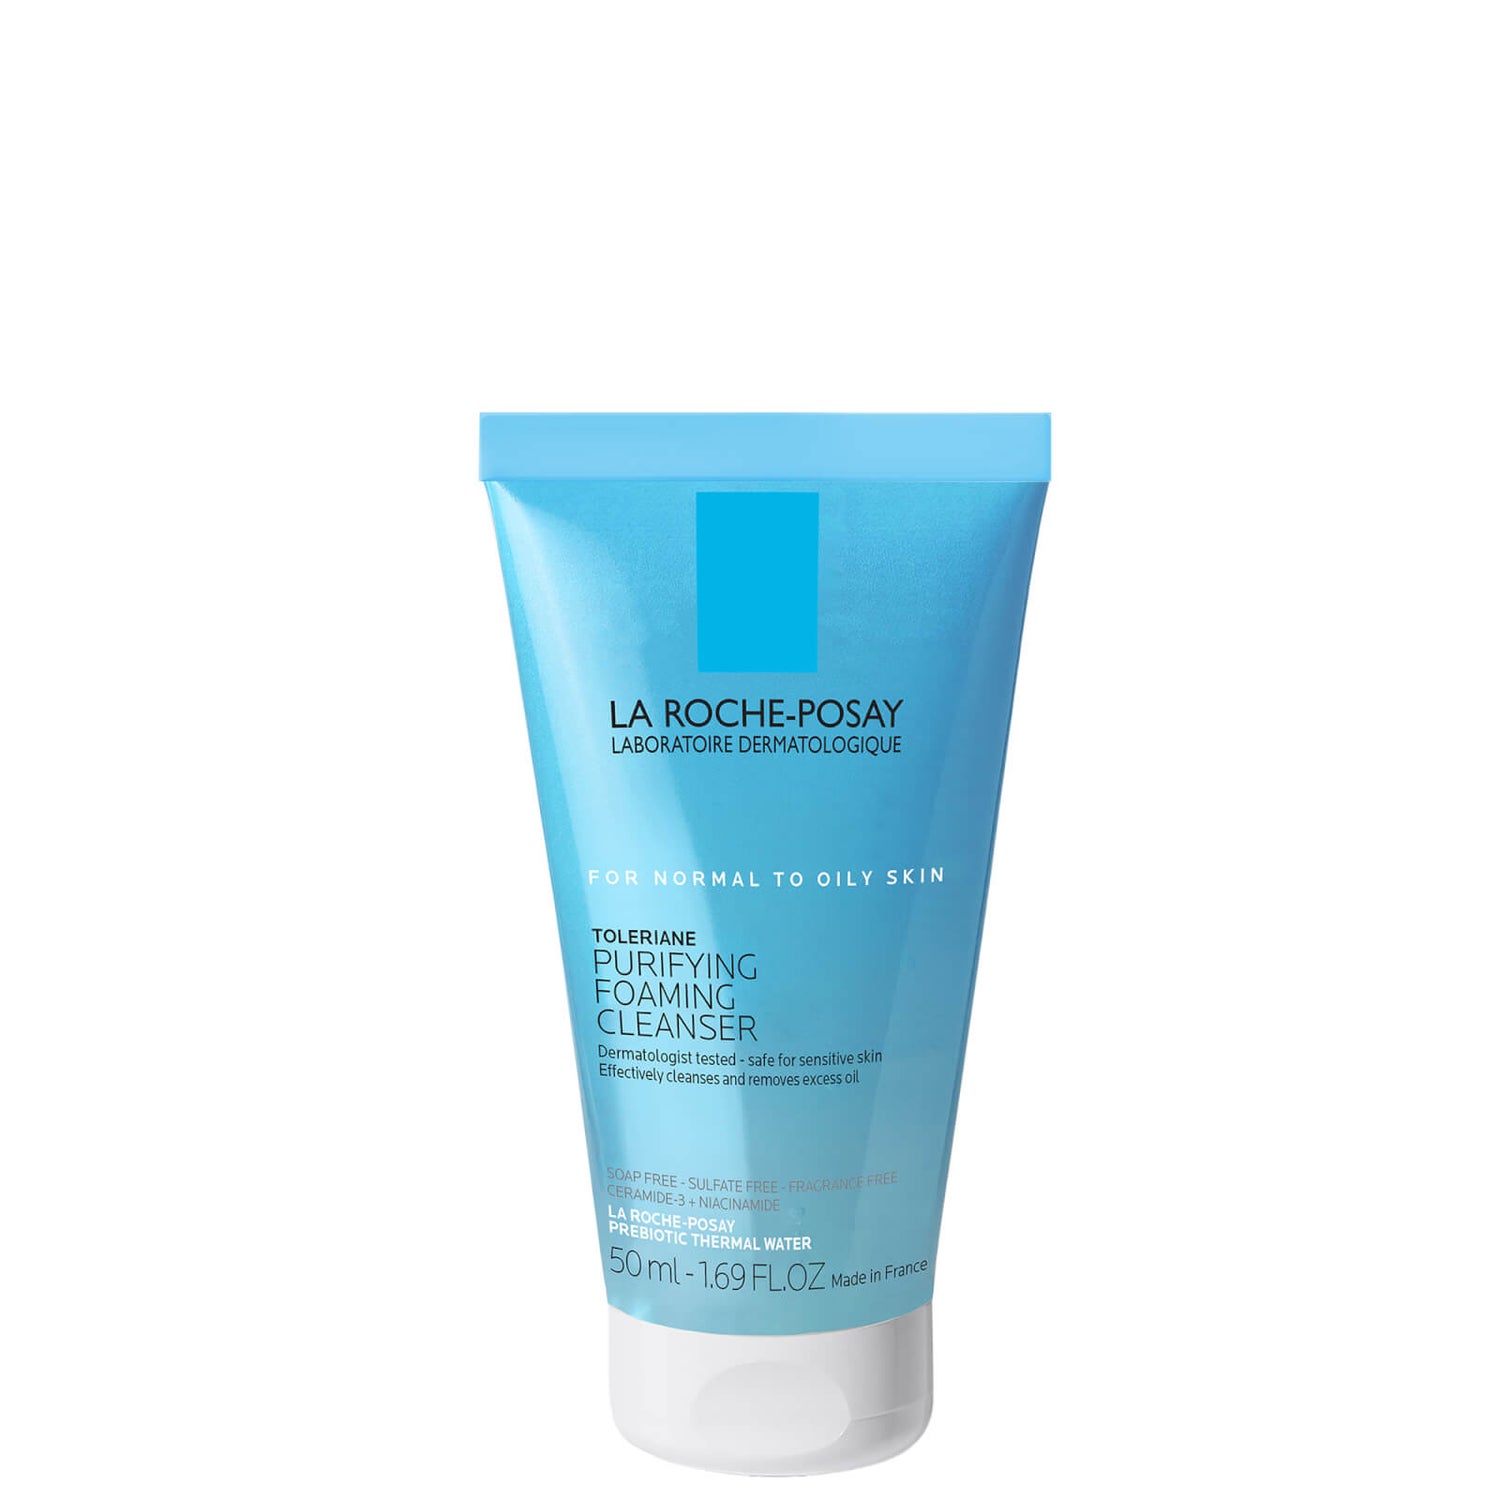 La Roche-Posay Toleriane Purifying Foaming Cleanser (Various Sizes)